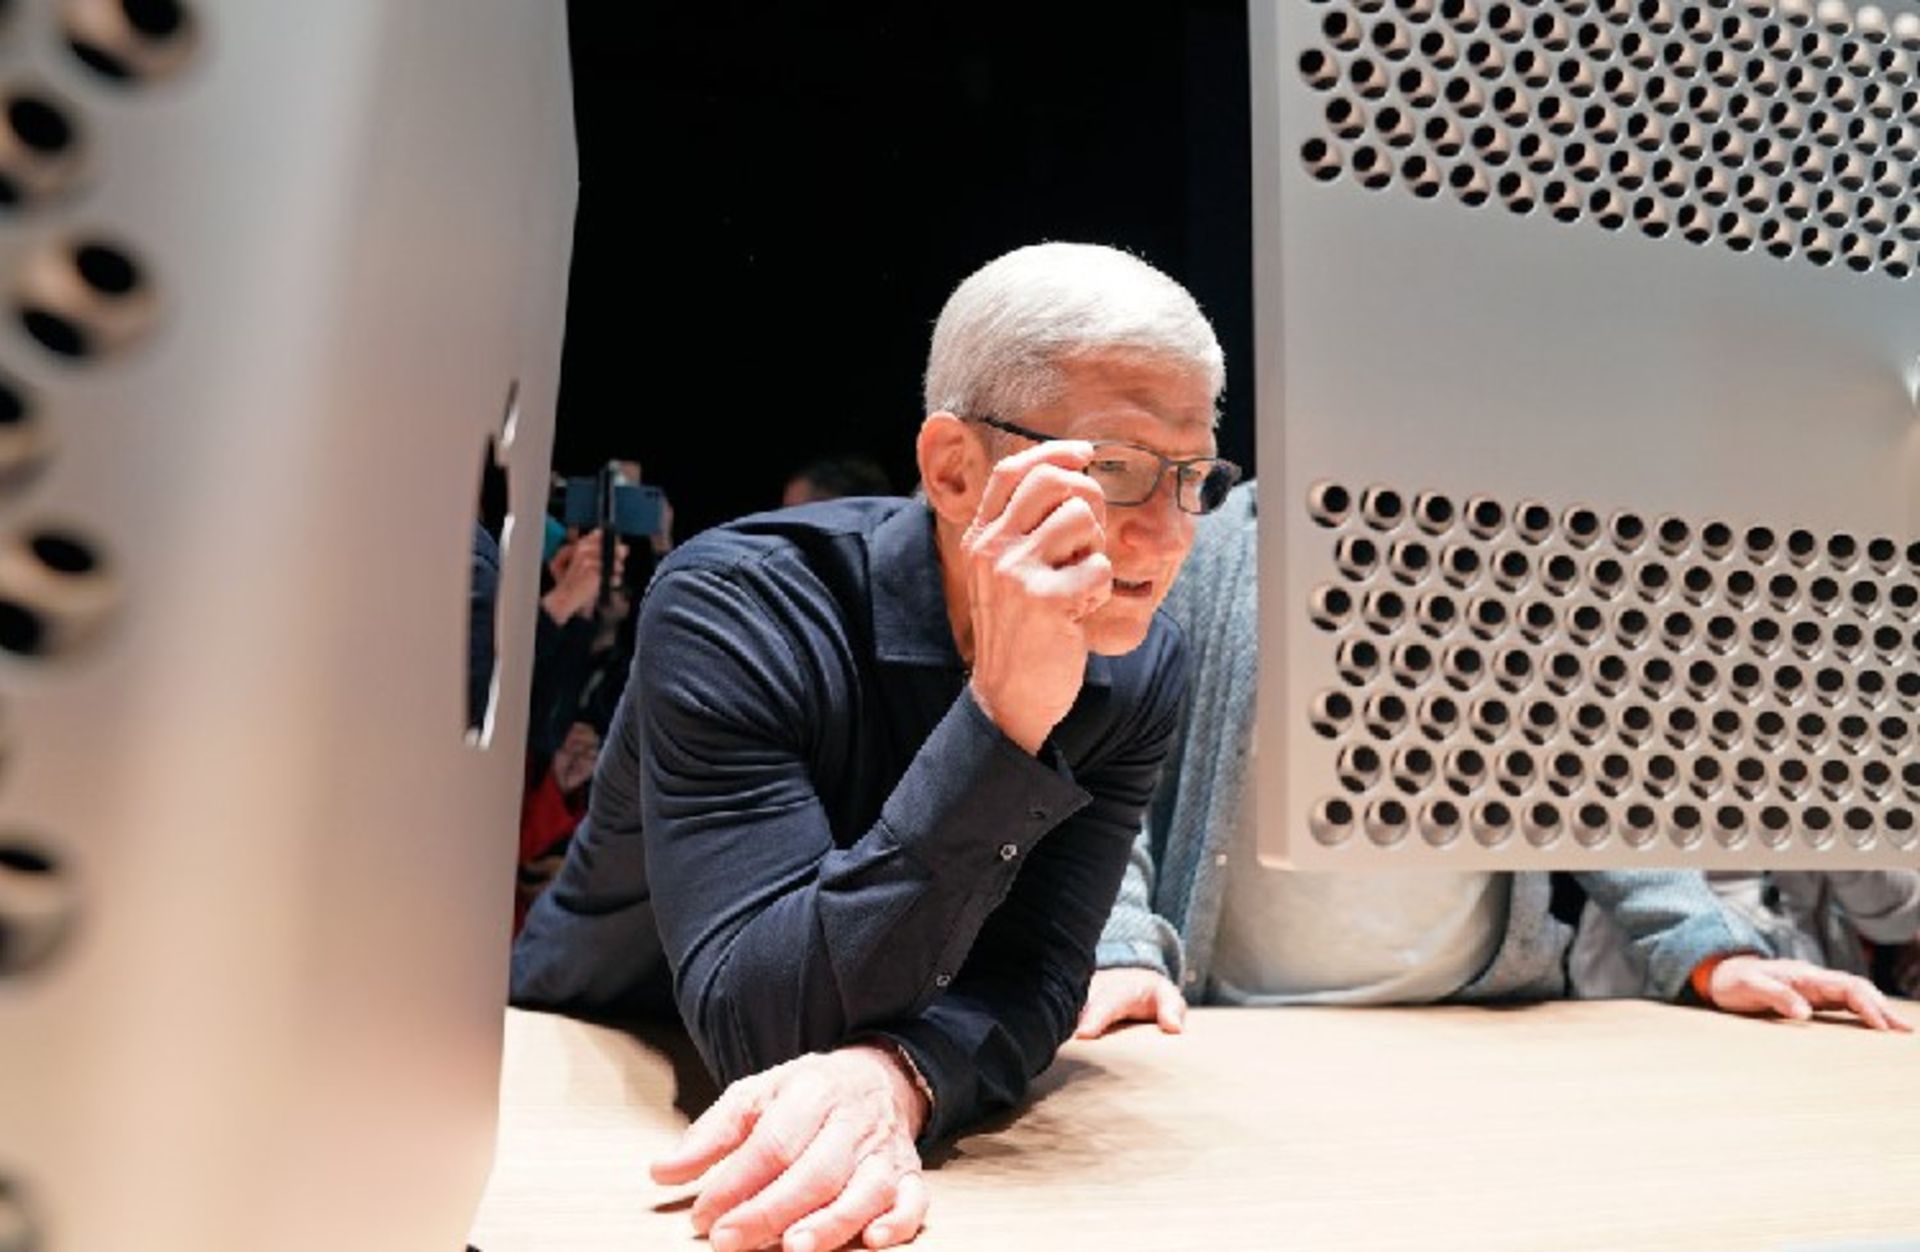 Apple CEO Tim Cook inspects one of the company's new Pro Display XDR monitors, which it unveiled last month